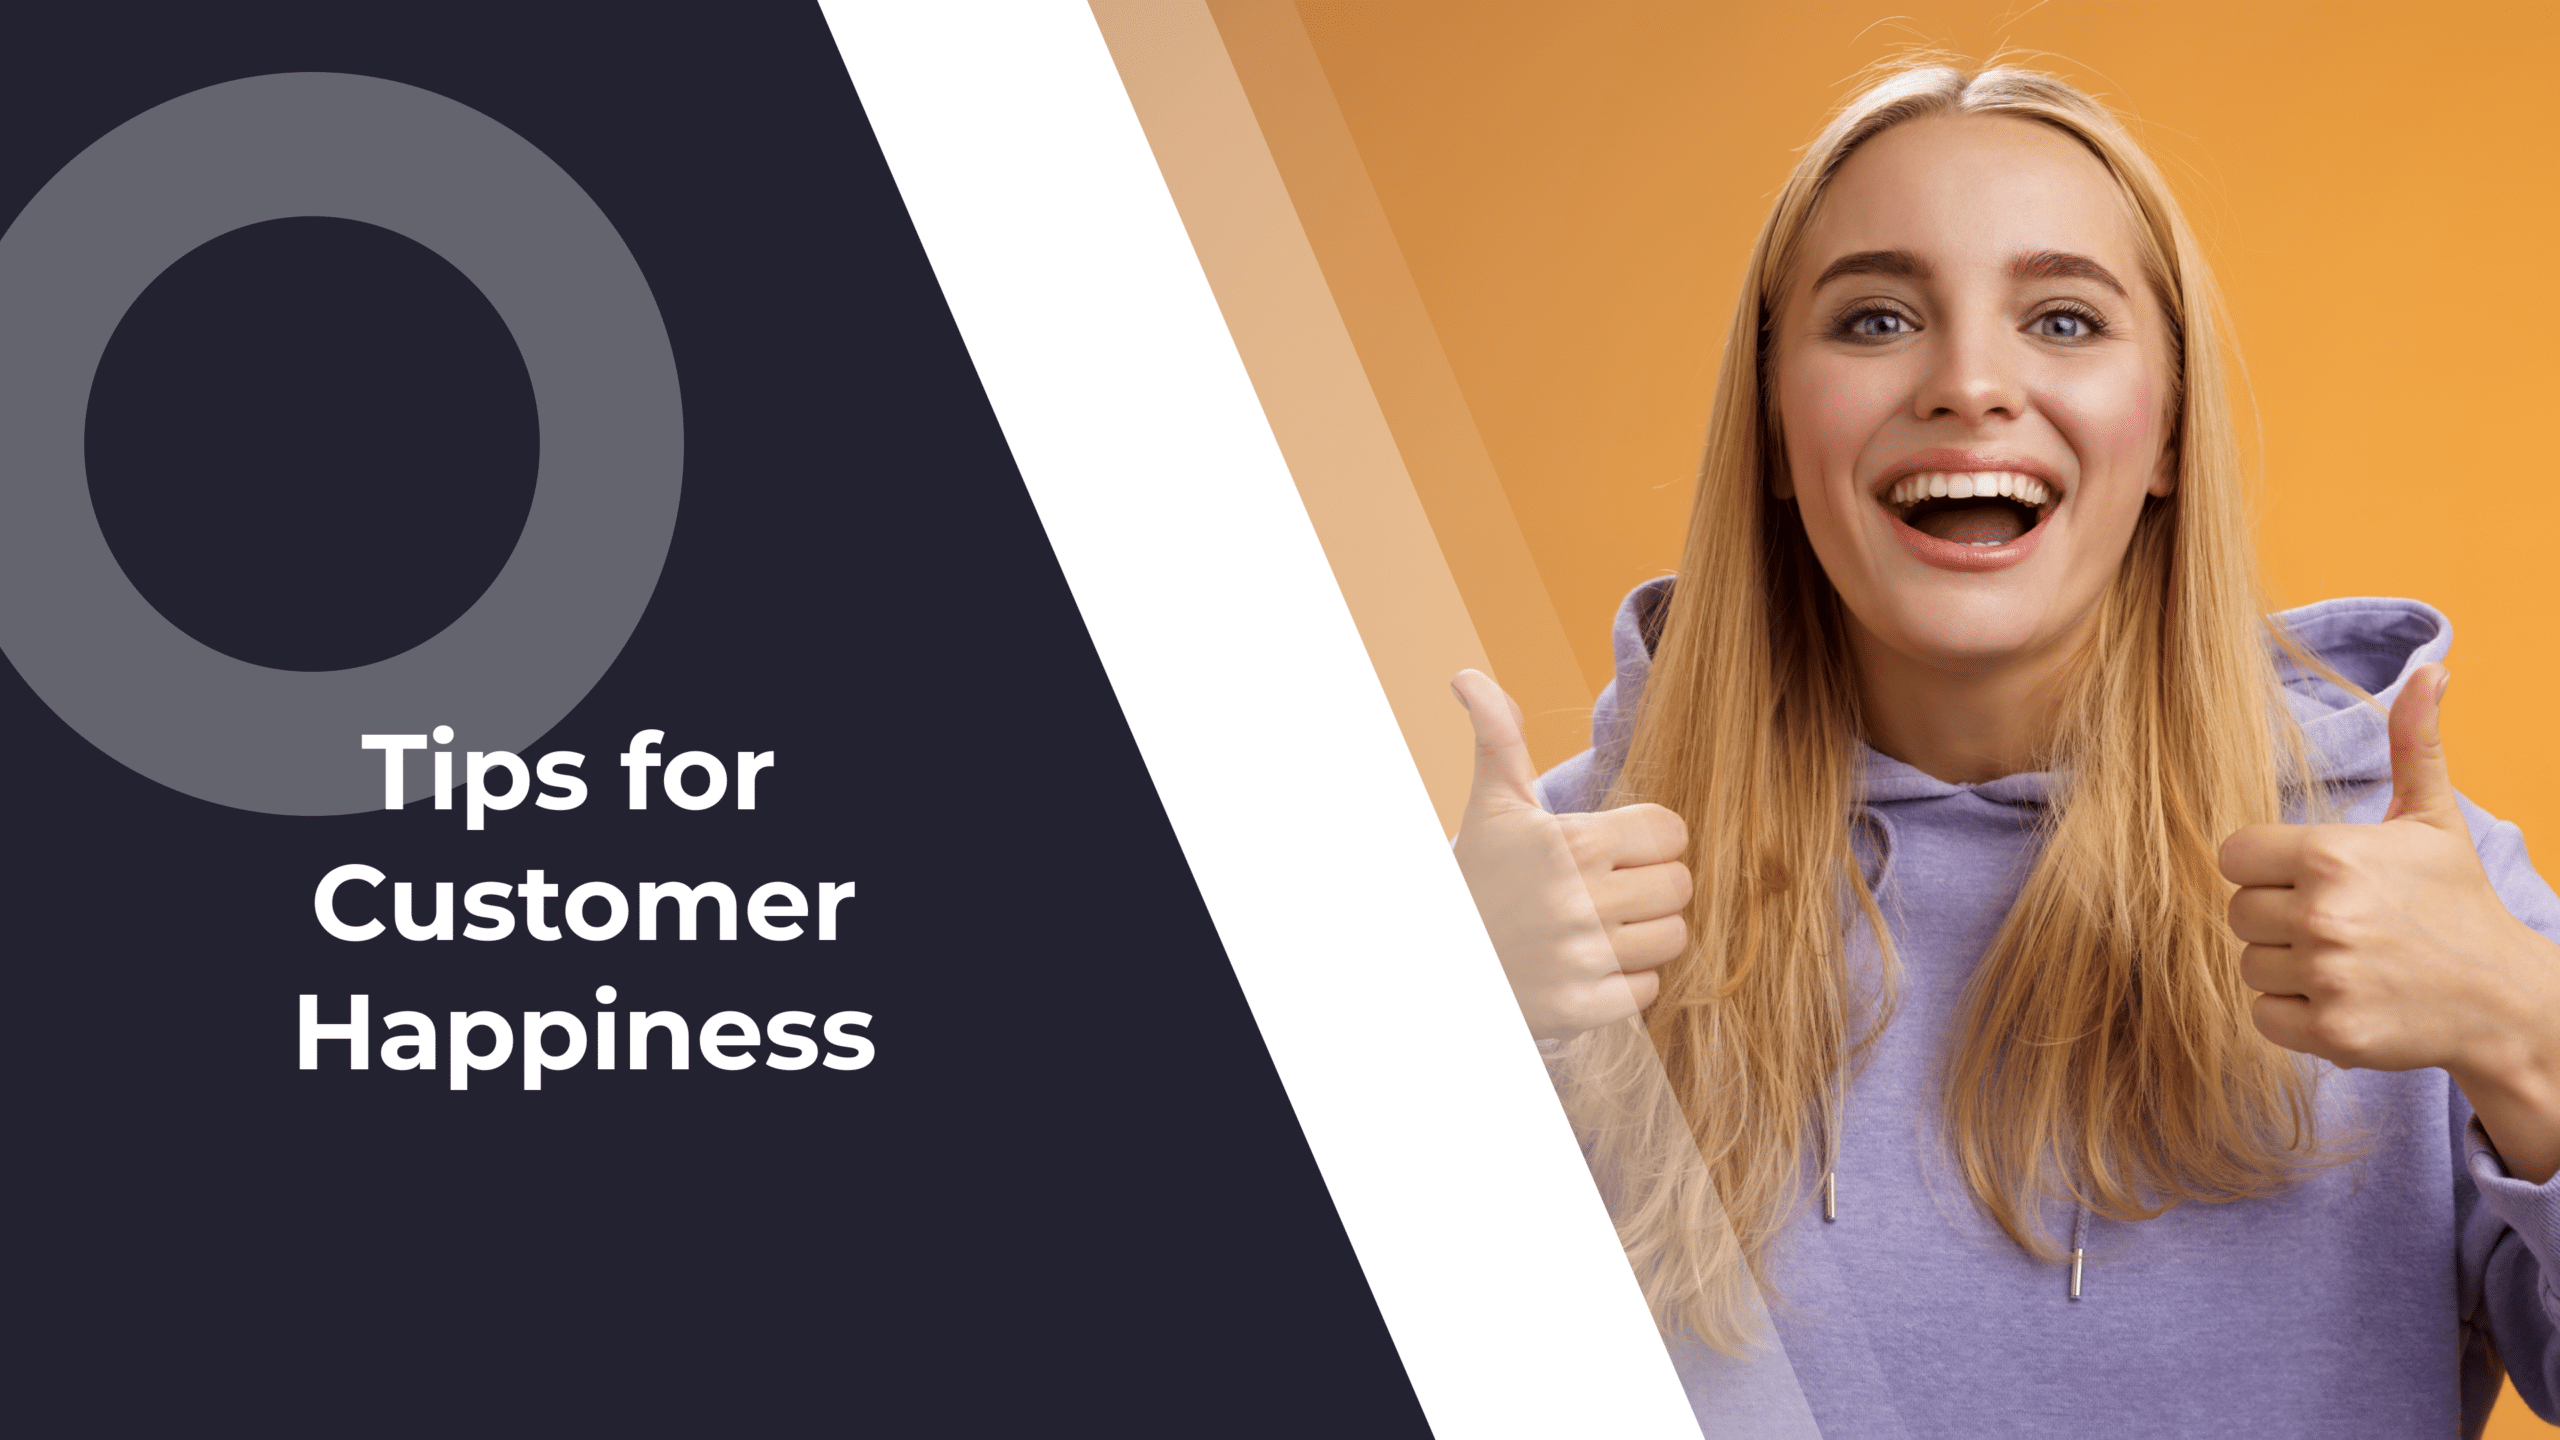 Tips to Excel at Customer Happiness (It’s Not What You Think)